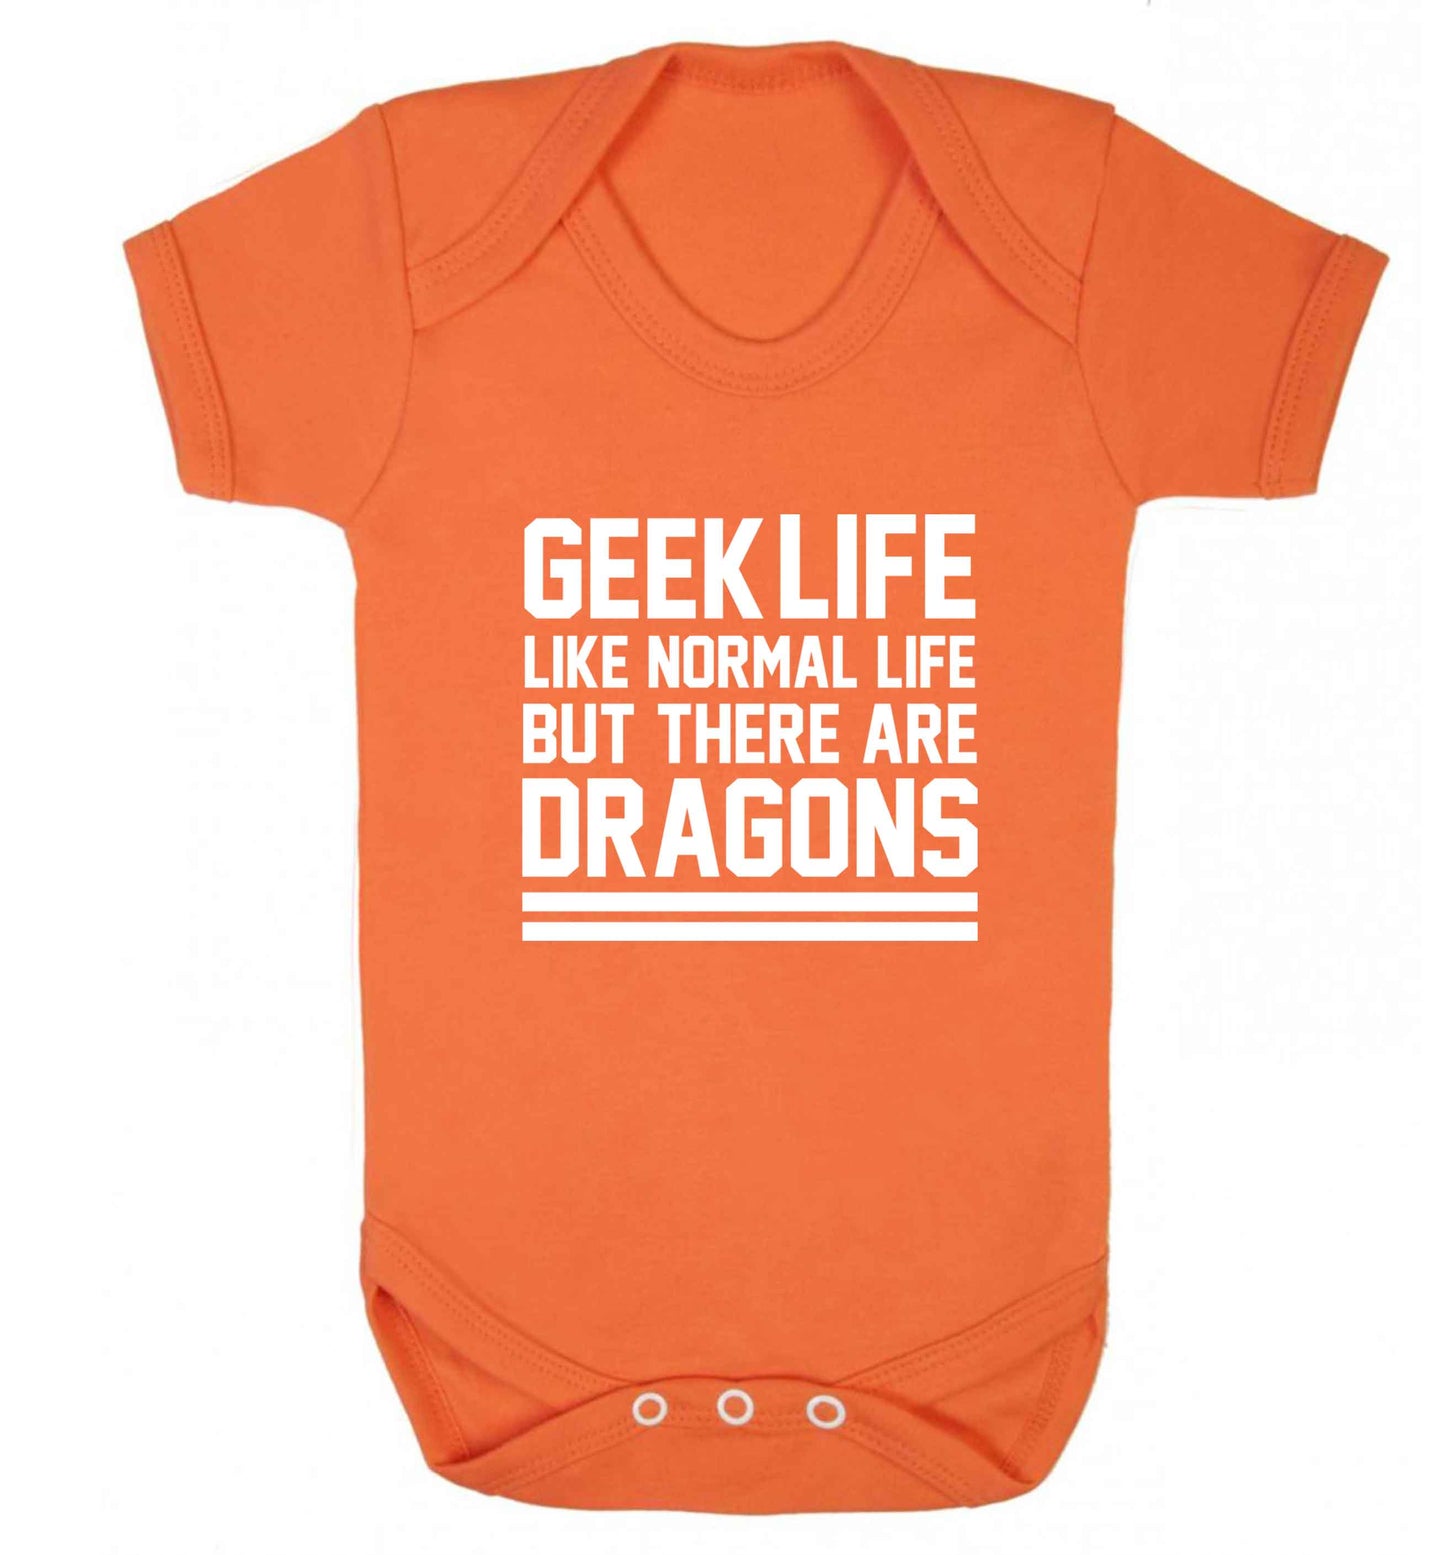 Geek life like normal life but there are dragons baby vest orange 18-24 months